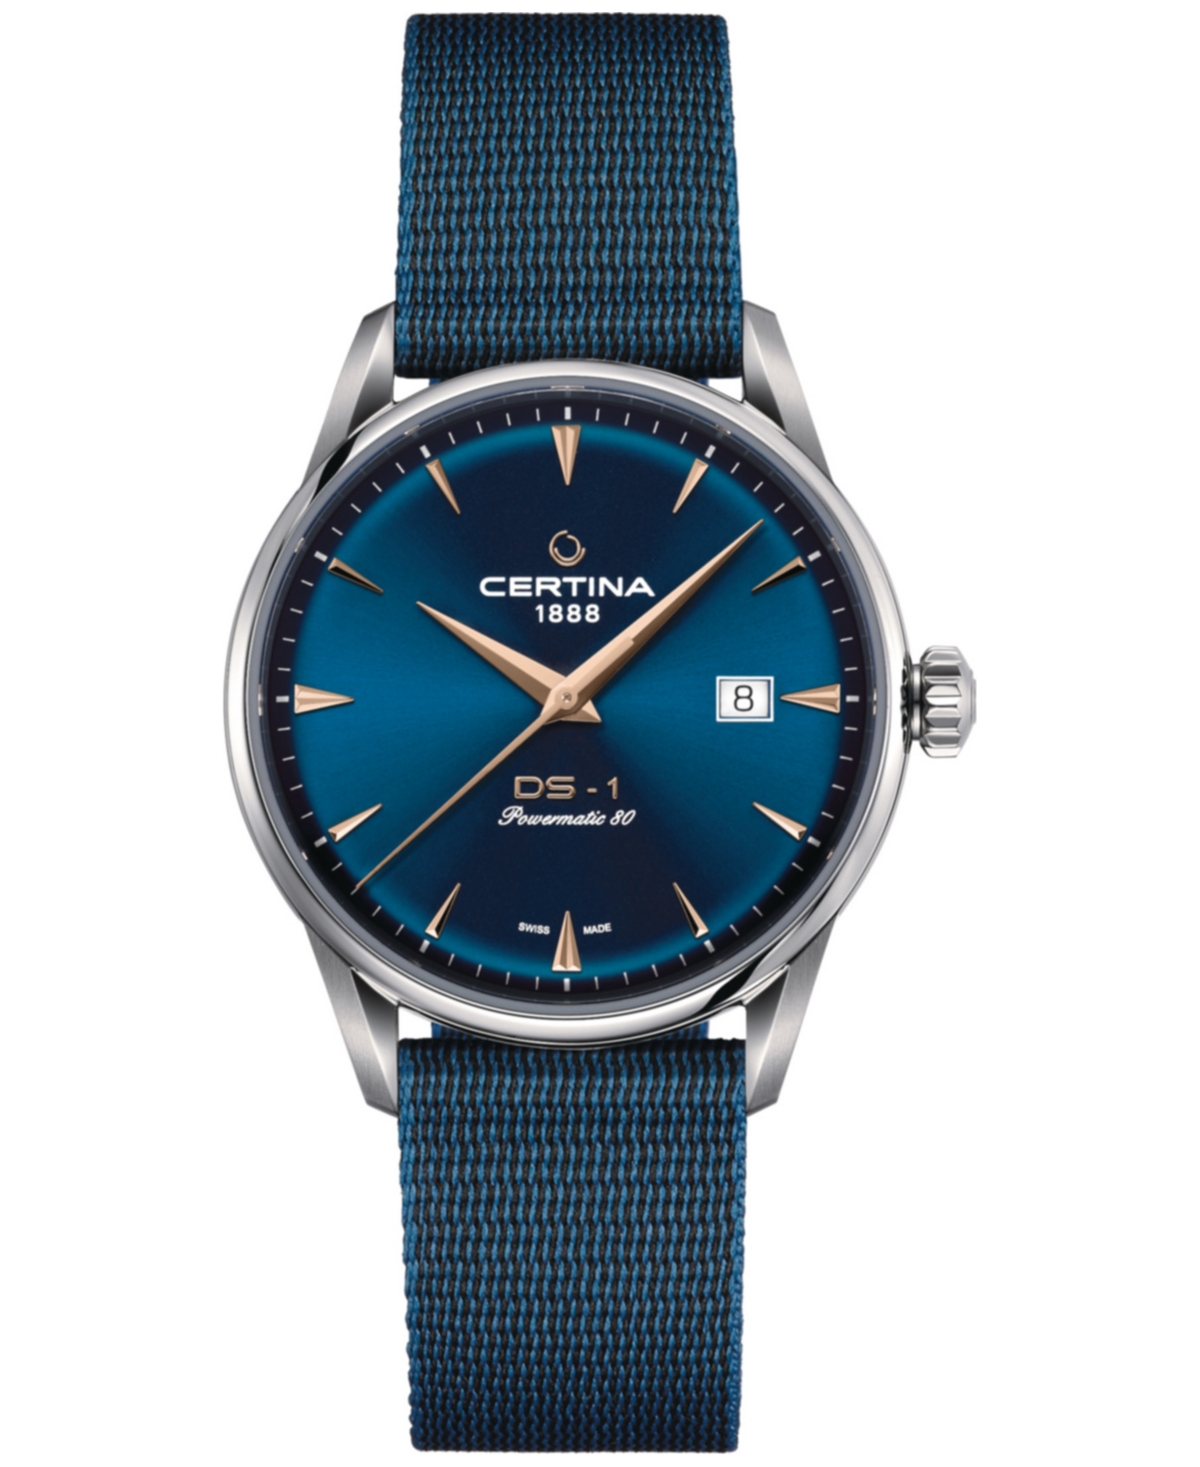 Certina Men's Swiss Automatic Ds-1 Blue Synthetic Strap Watch 40mm Gift Set